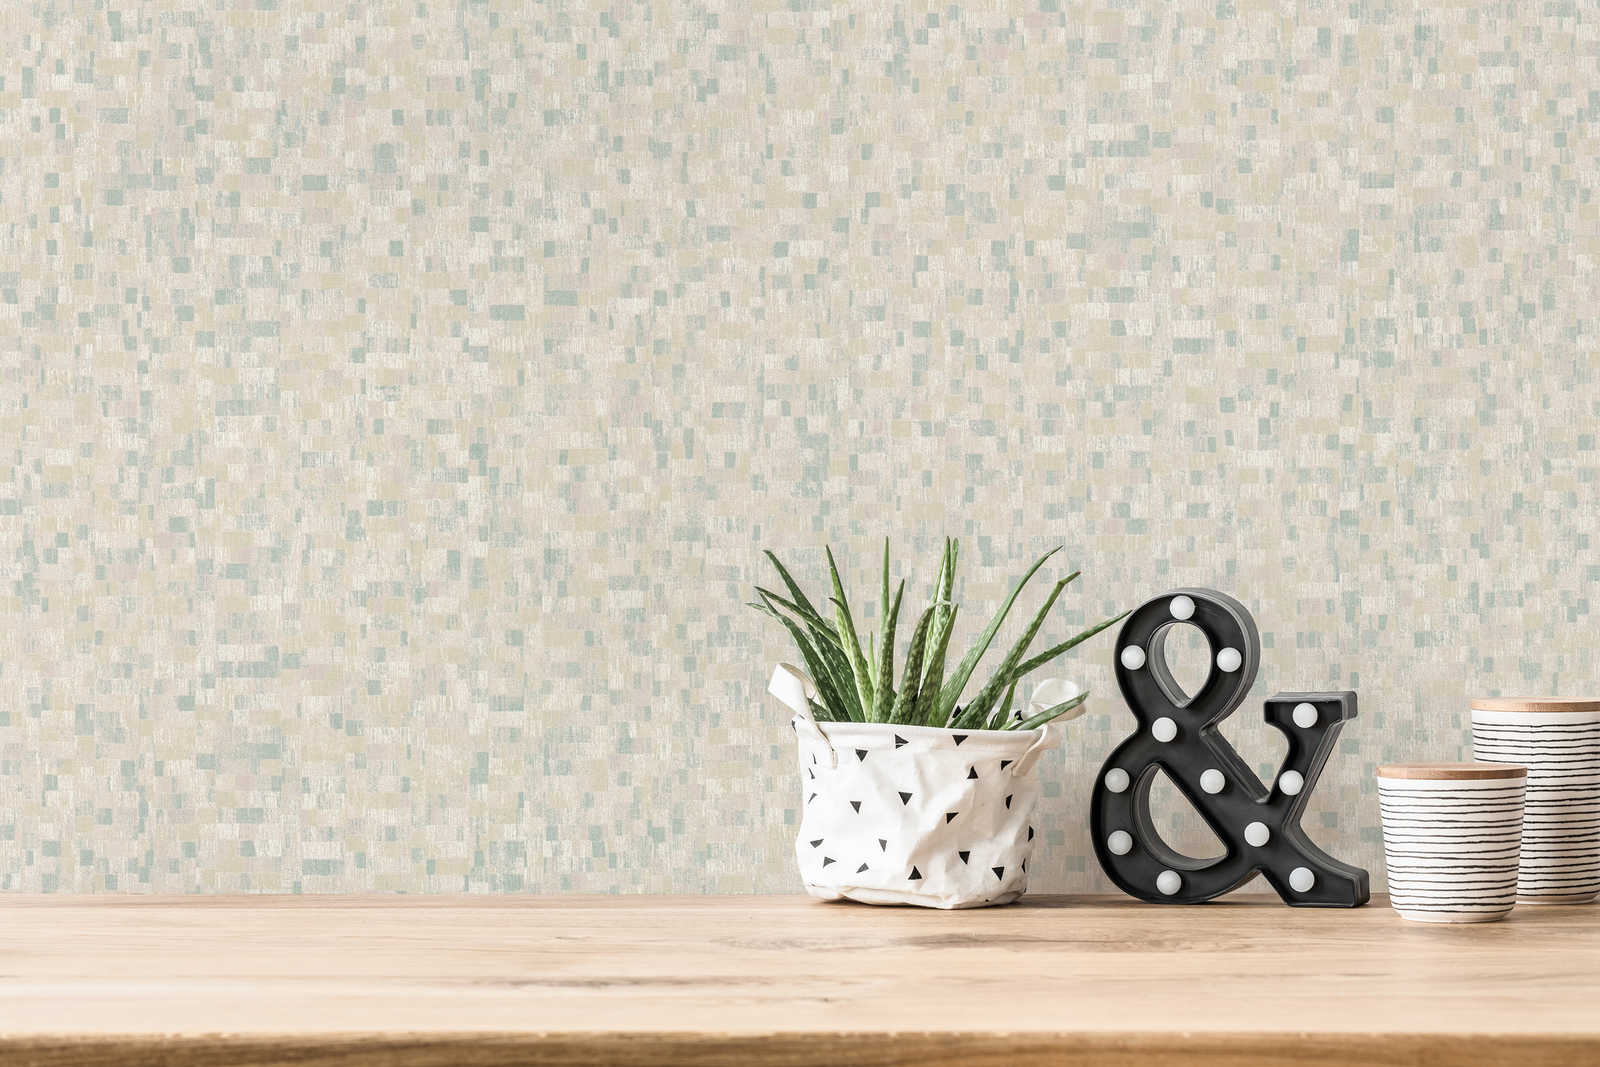             Textured wallpaper ethnic pattern in mosaic style - green, white
        